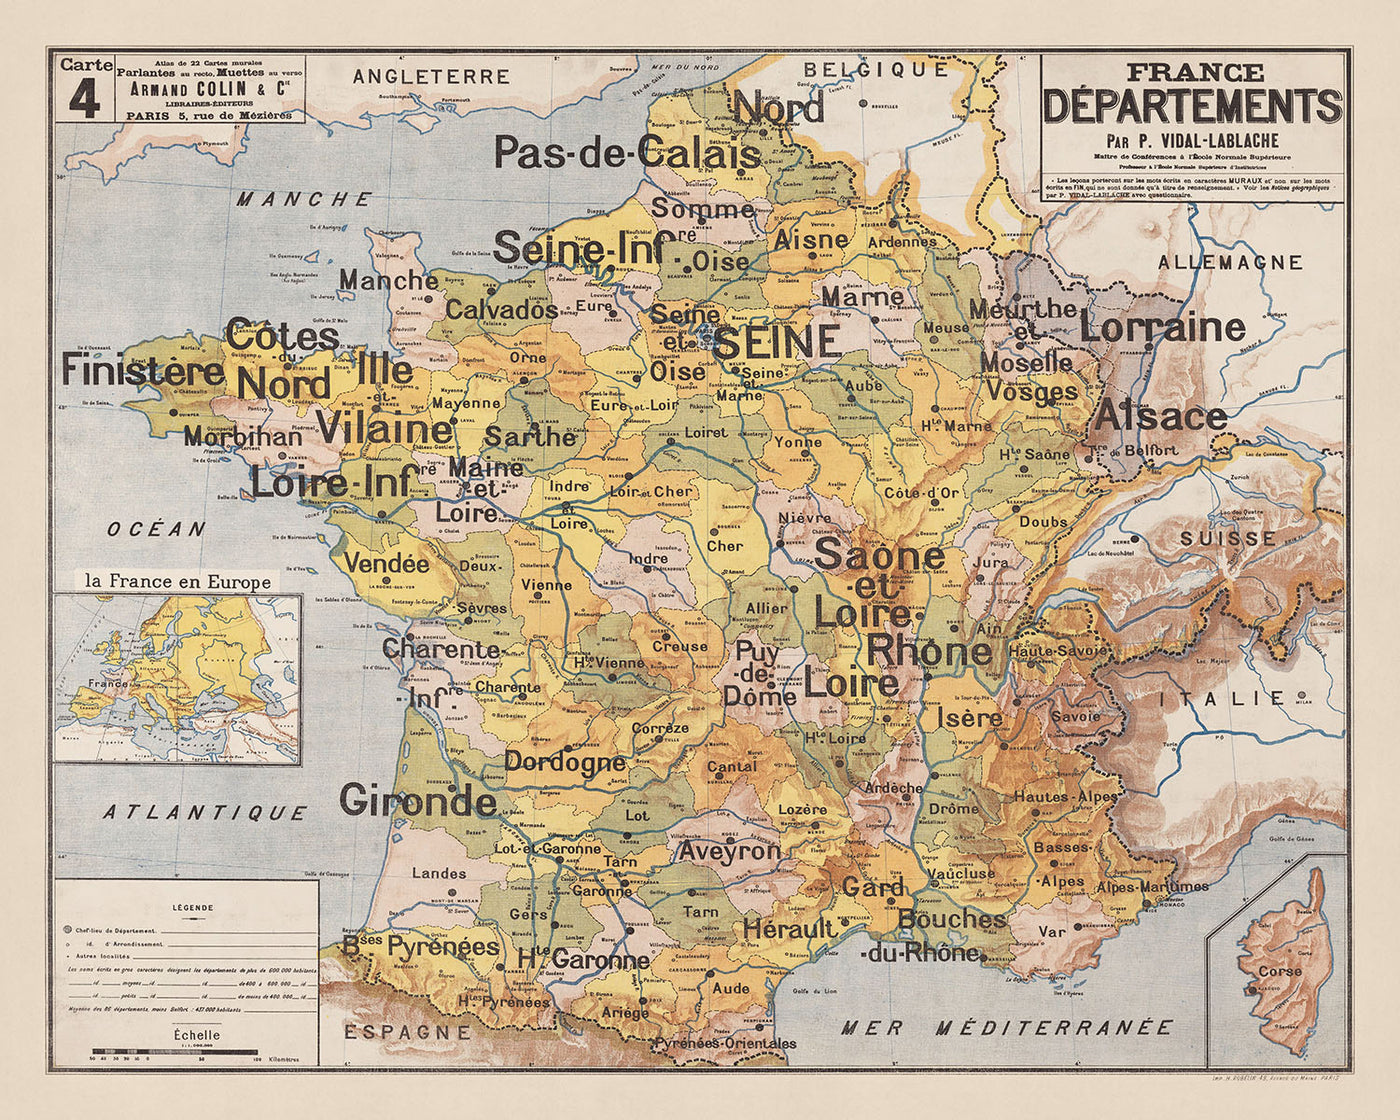 Old Map of France Departments by Vidal Lablache, 1897: Educational Wall Chart